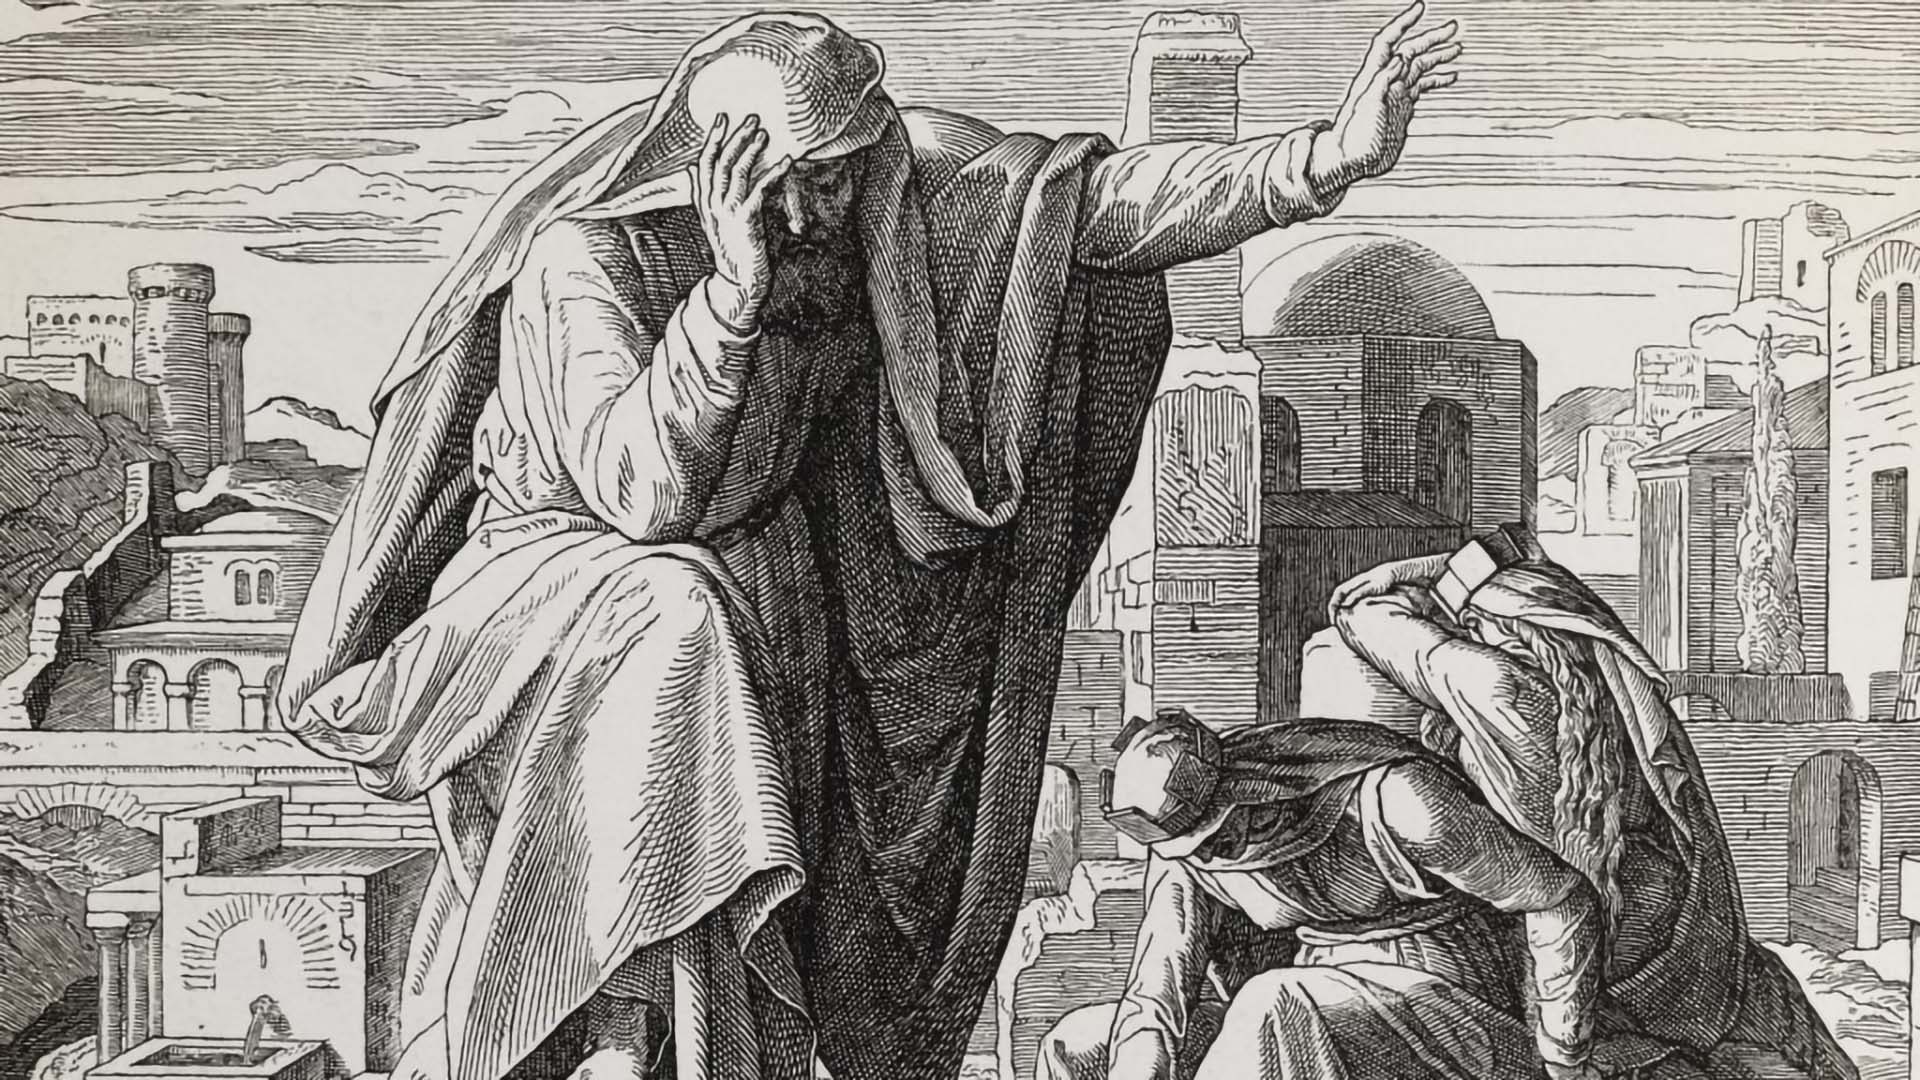 The Cry of Jeremiah the Prophet, from an engraving by the Nazarene School. Image via Church of Jesus Christ.